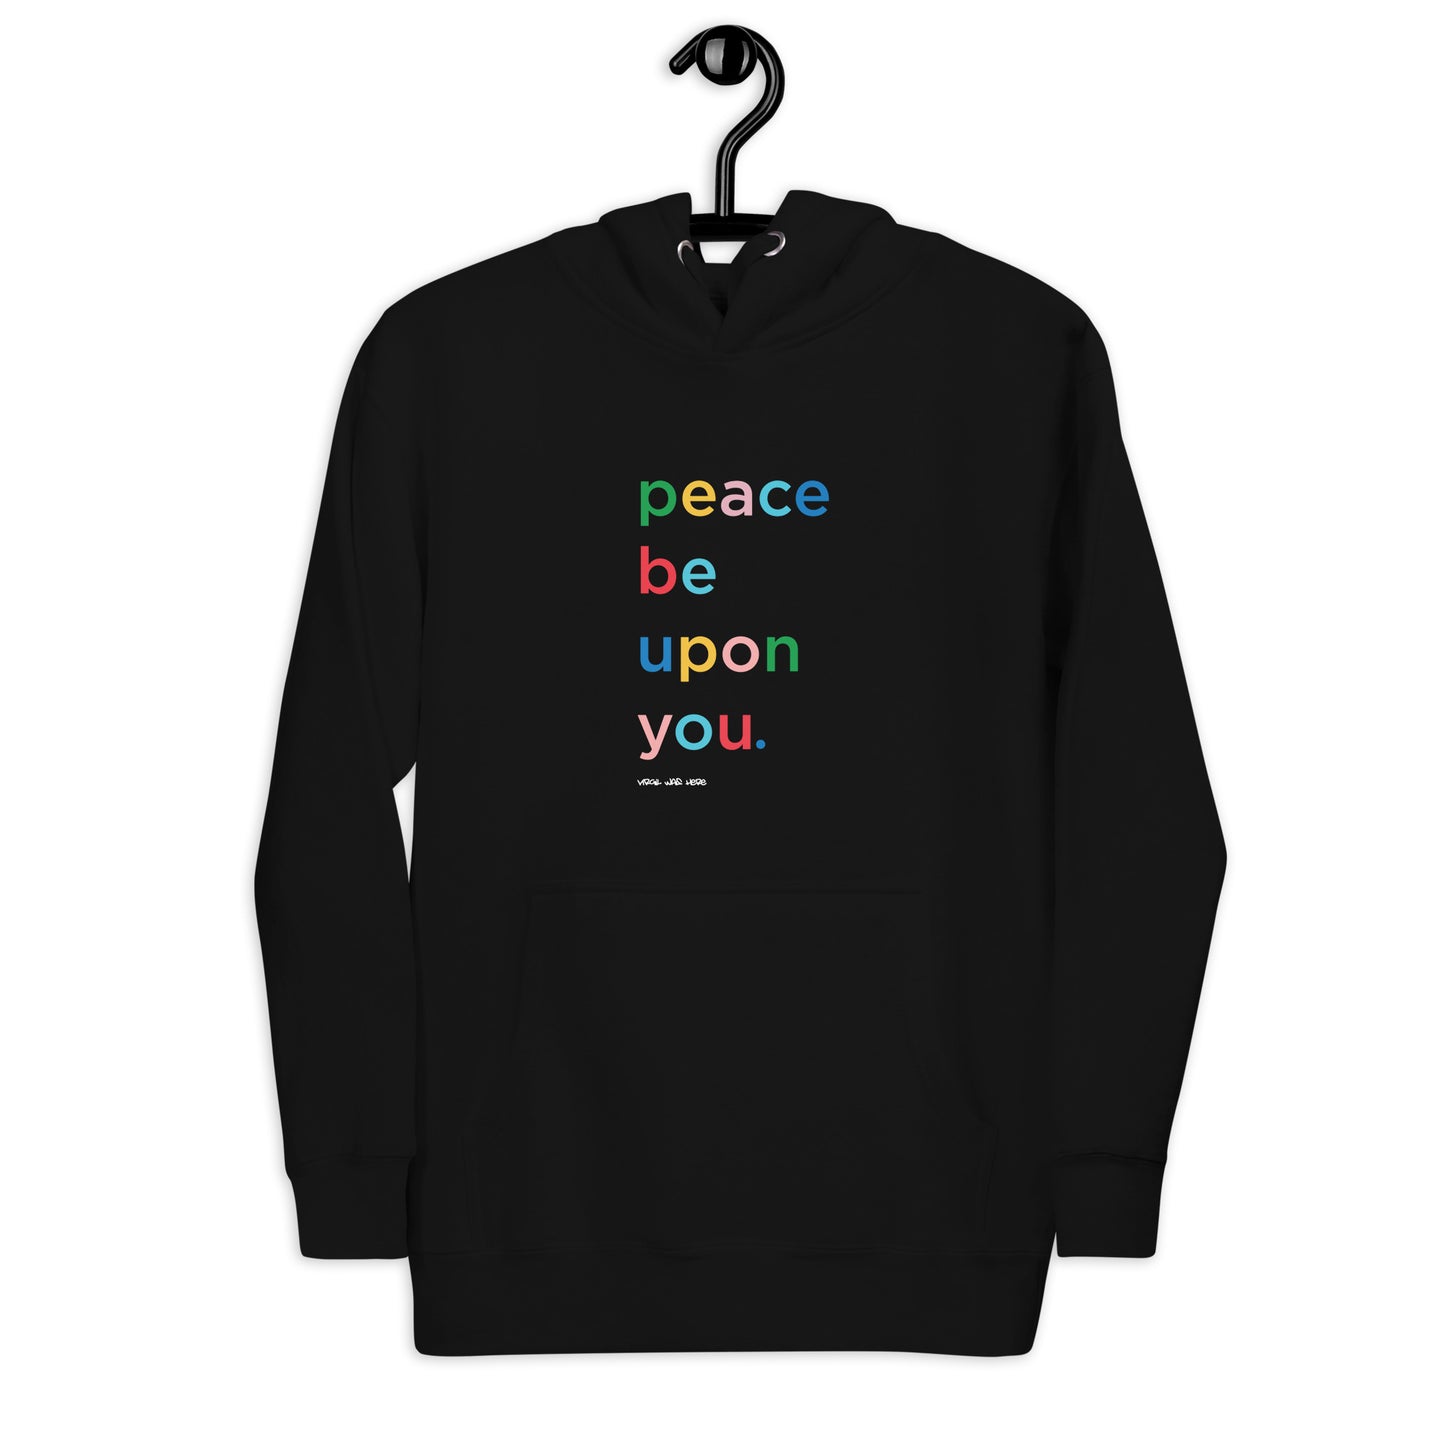 PEACE BE UPON YOU Hoodie